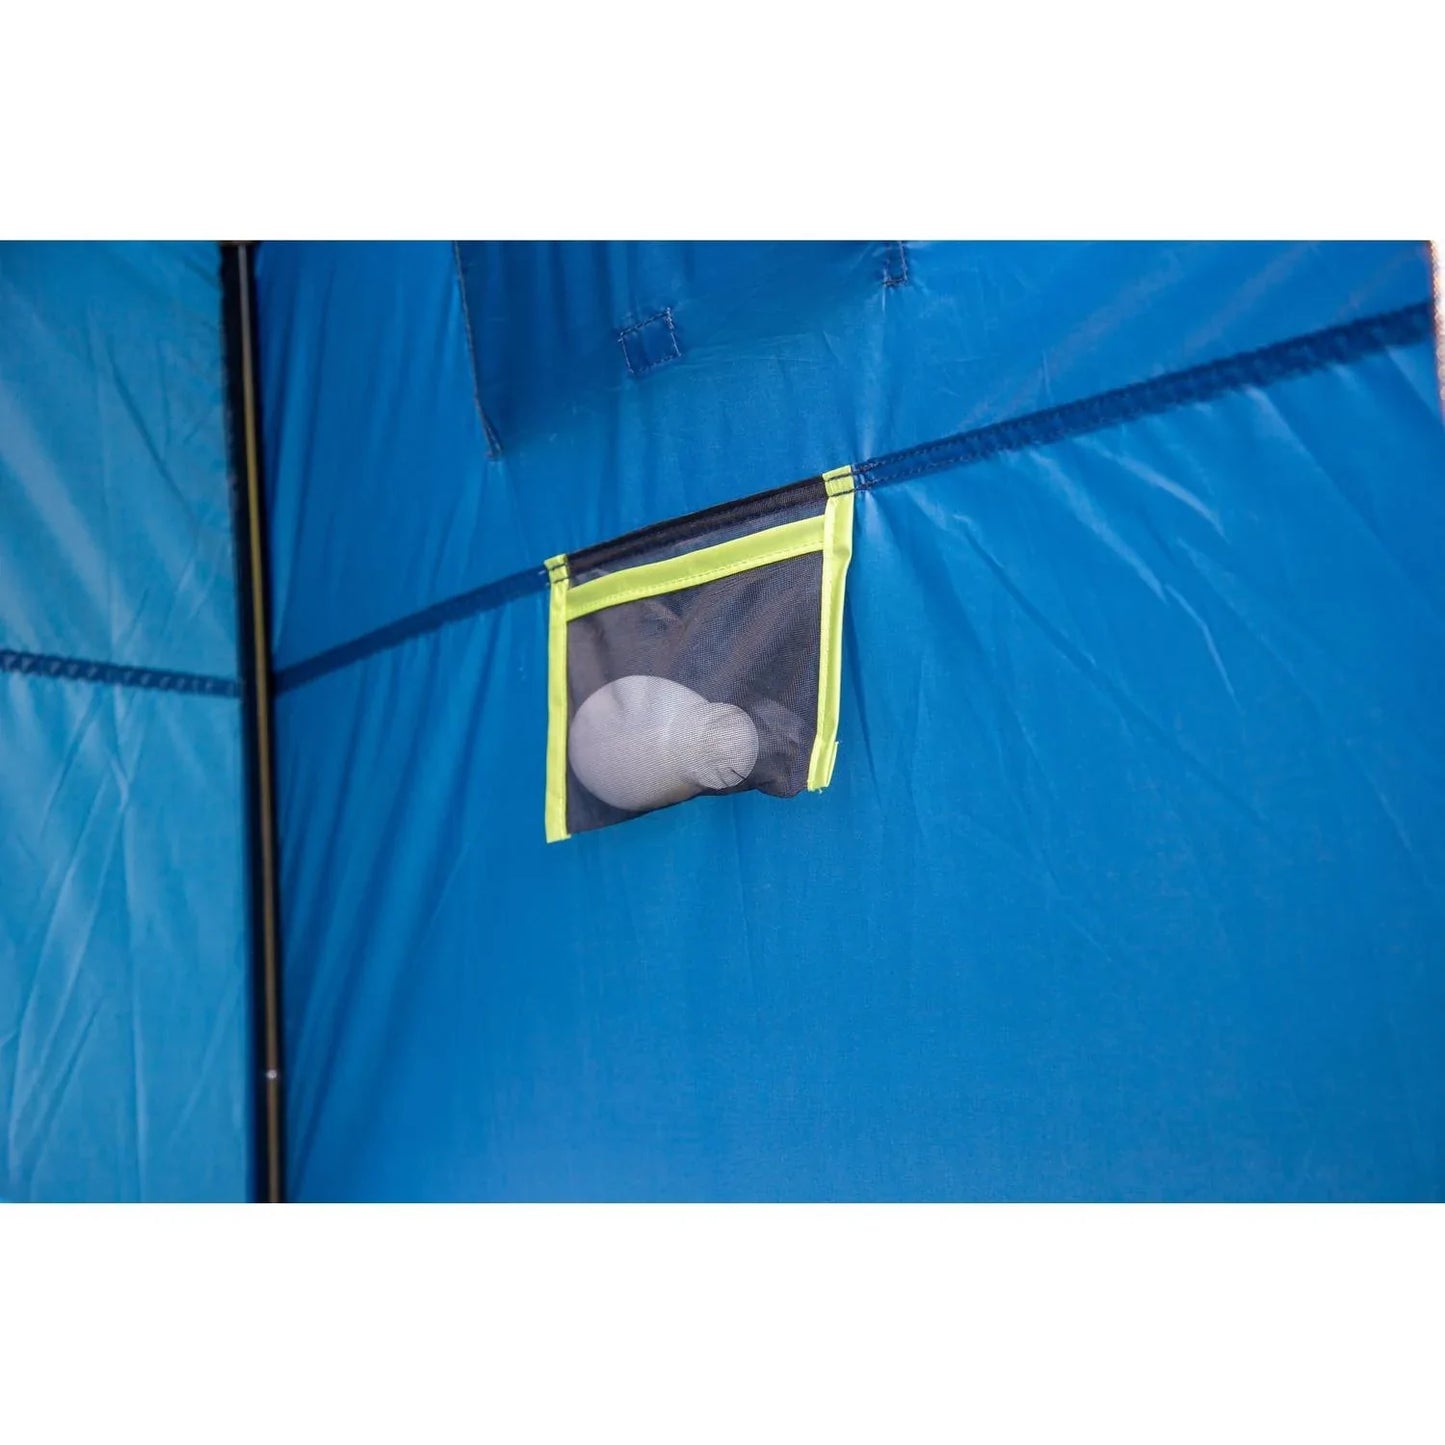 Camping Kingfisher Shower Tent W: 1200mm, H: 2100mm, D: 1200mm Blue